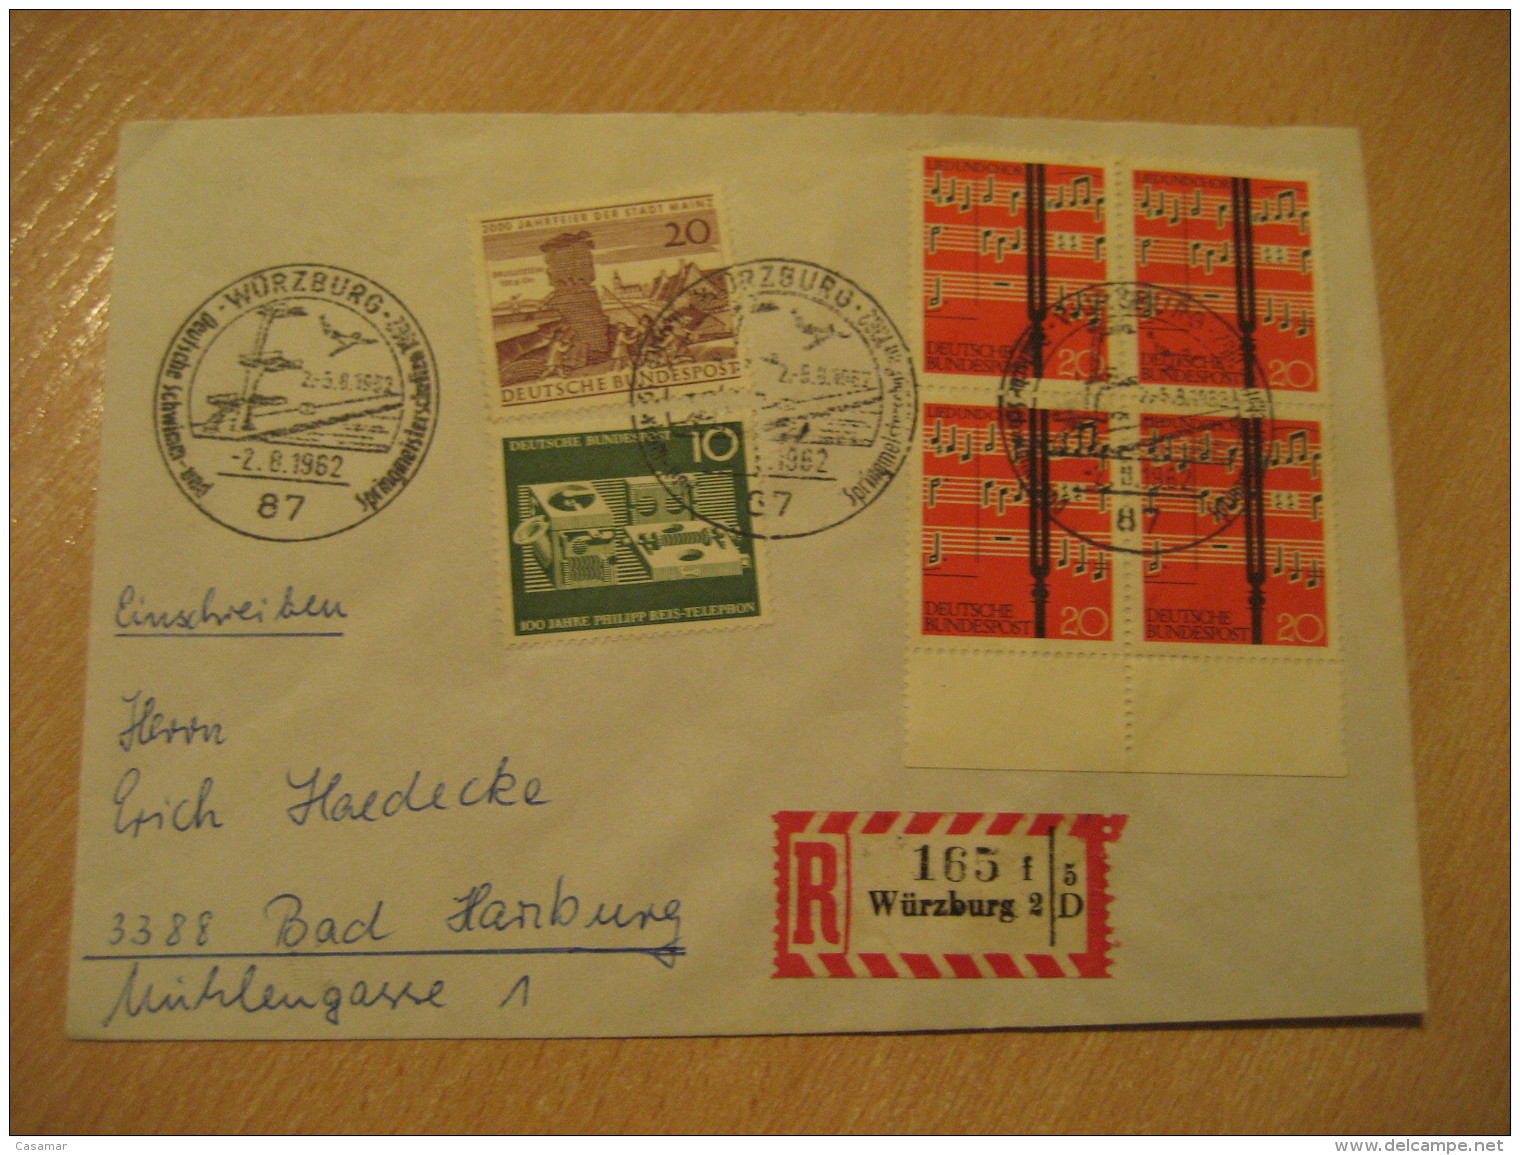 WURZBURG 1962 DIVING Trampolin Saut Jump Swimming Cancel Registered Cover GERMANY - Duiken